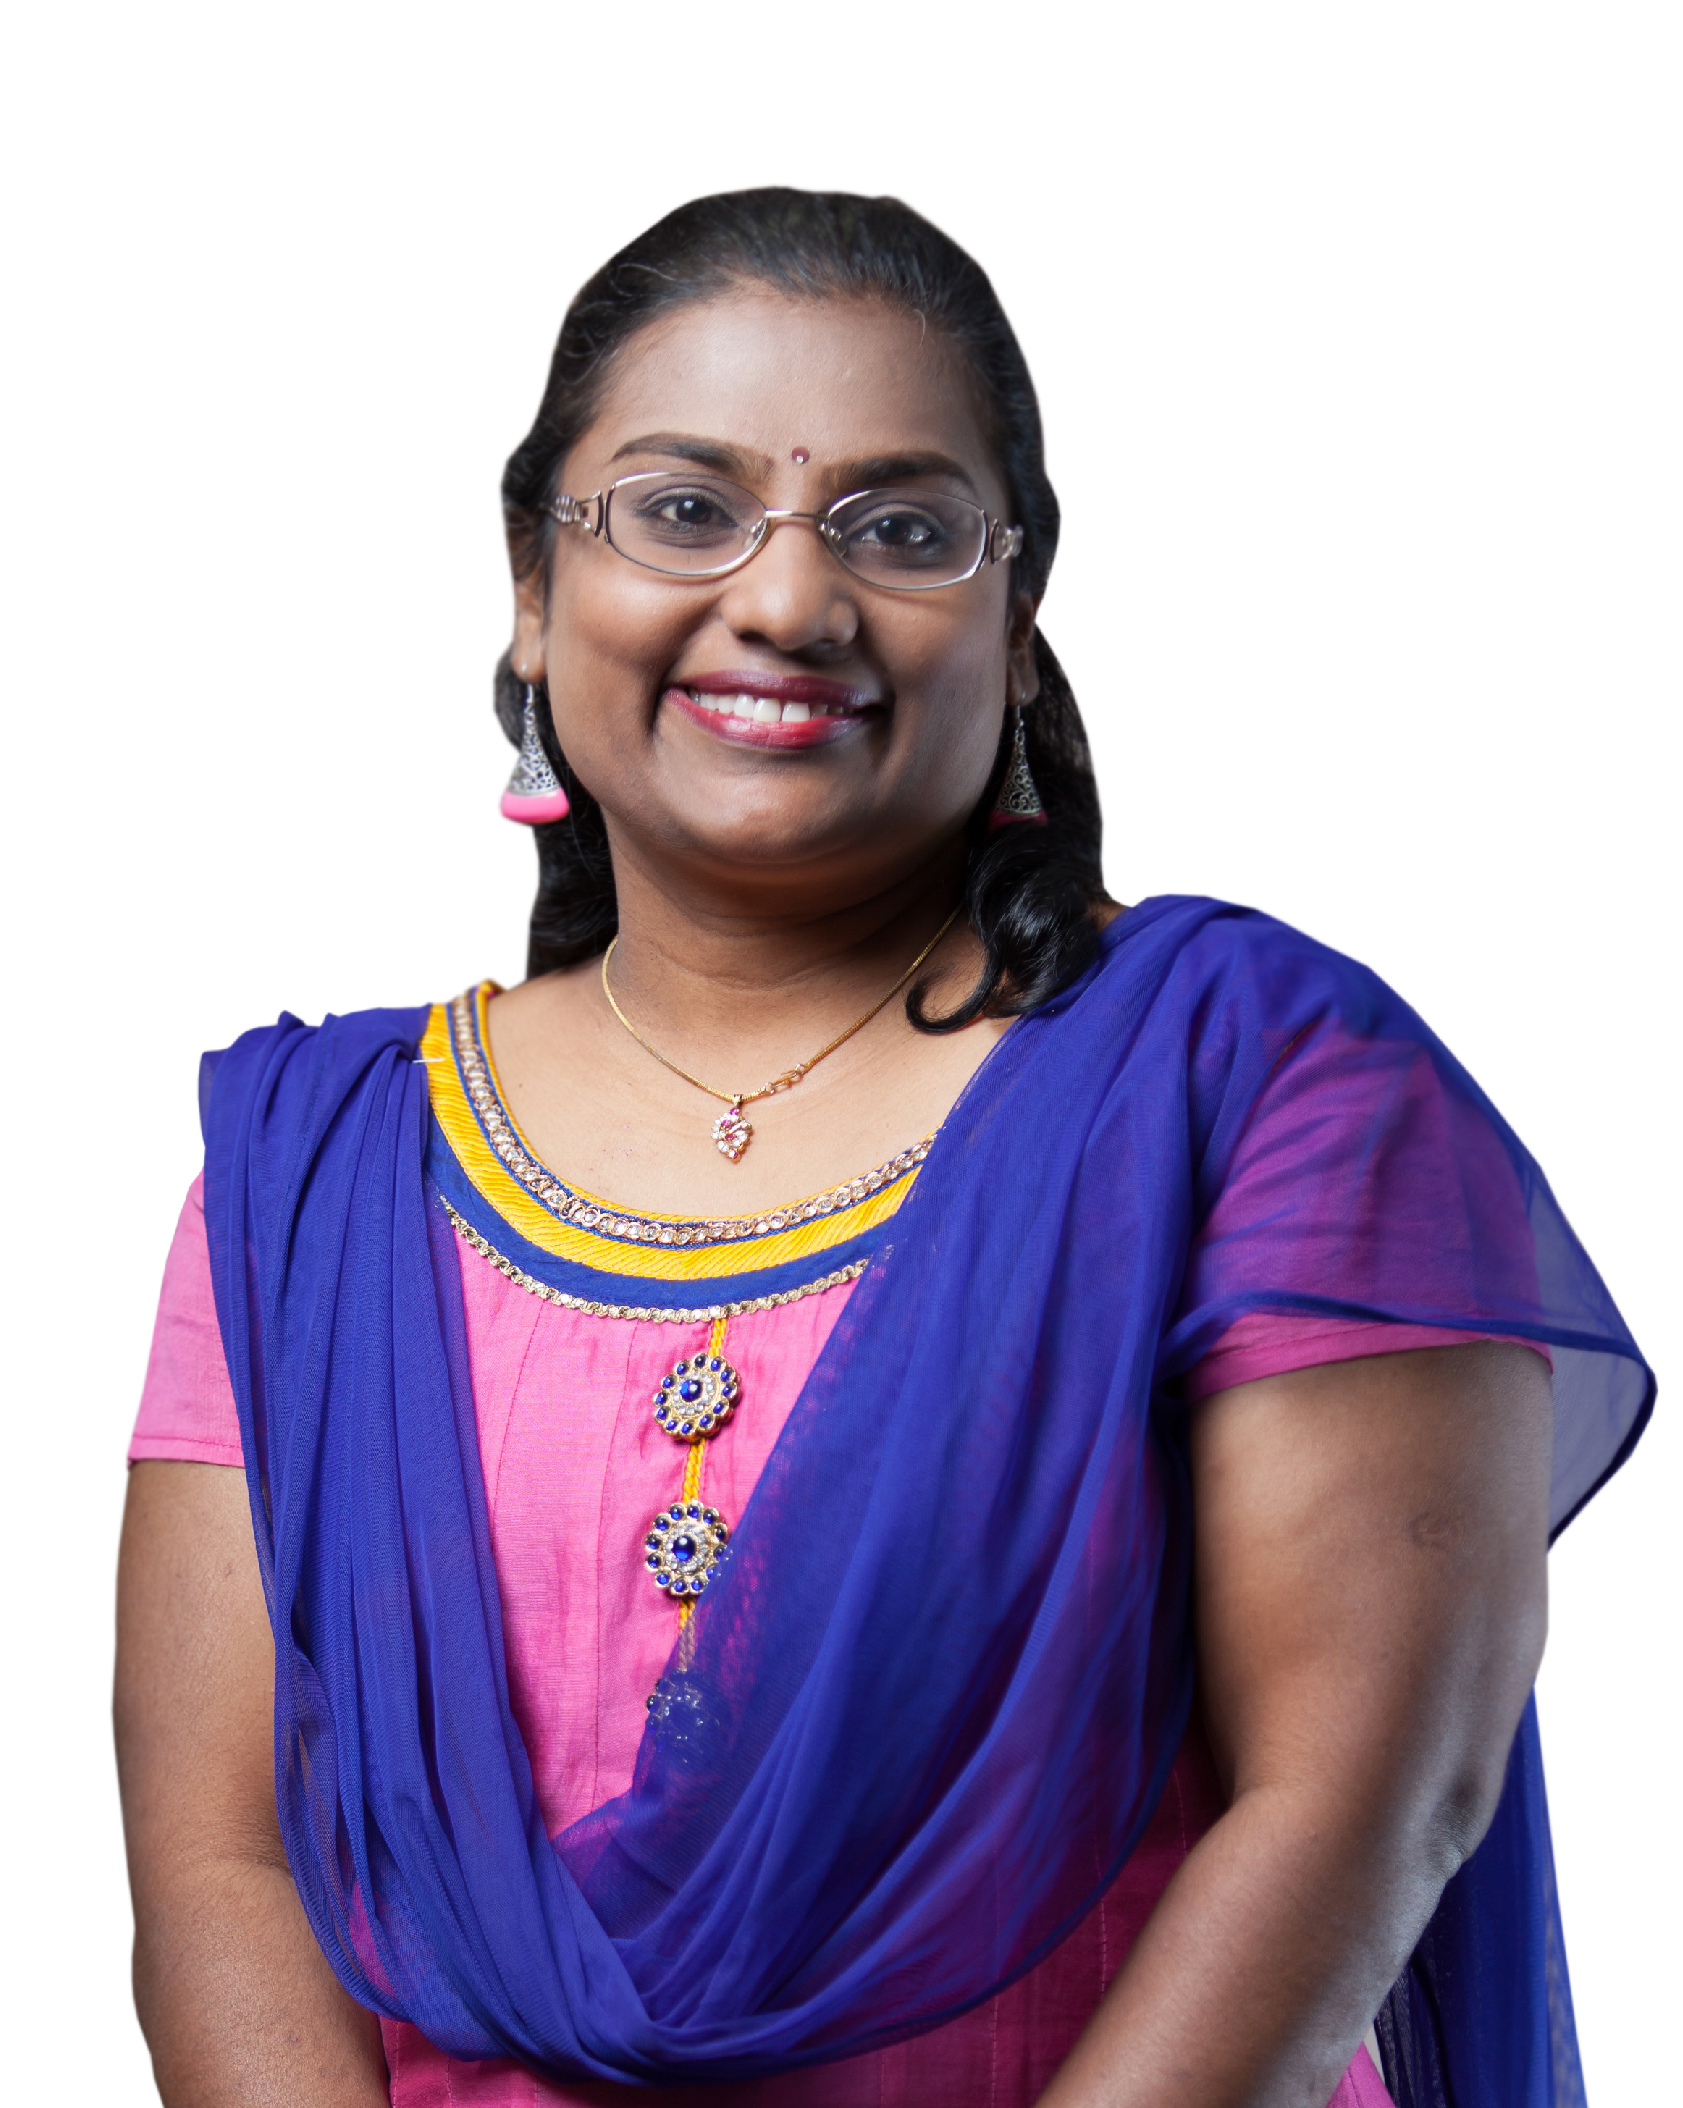 Dr. Alagammai A/P Ramanathan, an Obstetrics and Gynaecology (O&G) consultant in Gleneagles Hospital Kota Kinabalu